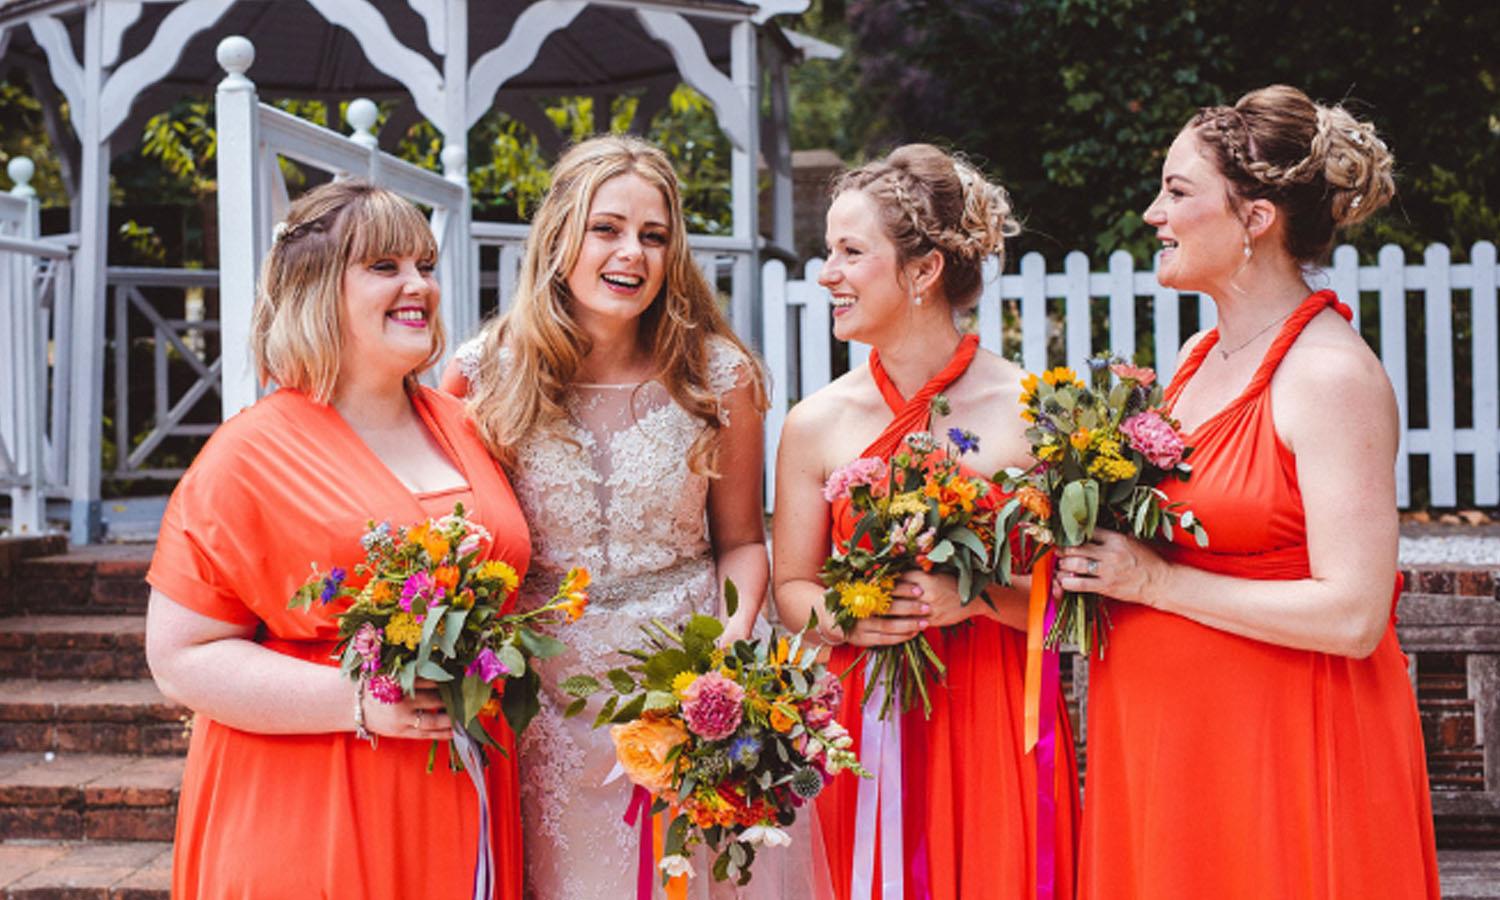 Bride and bridesmaids with flowers. Photo Credit: Nicola Casey Photography